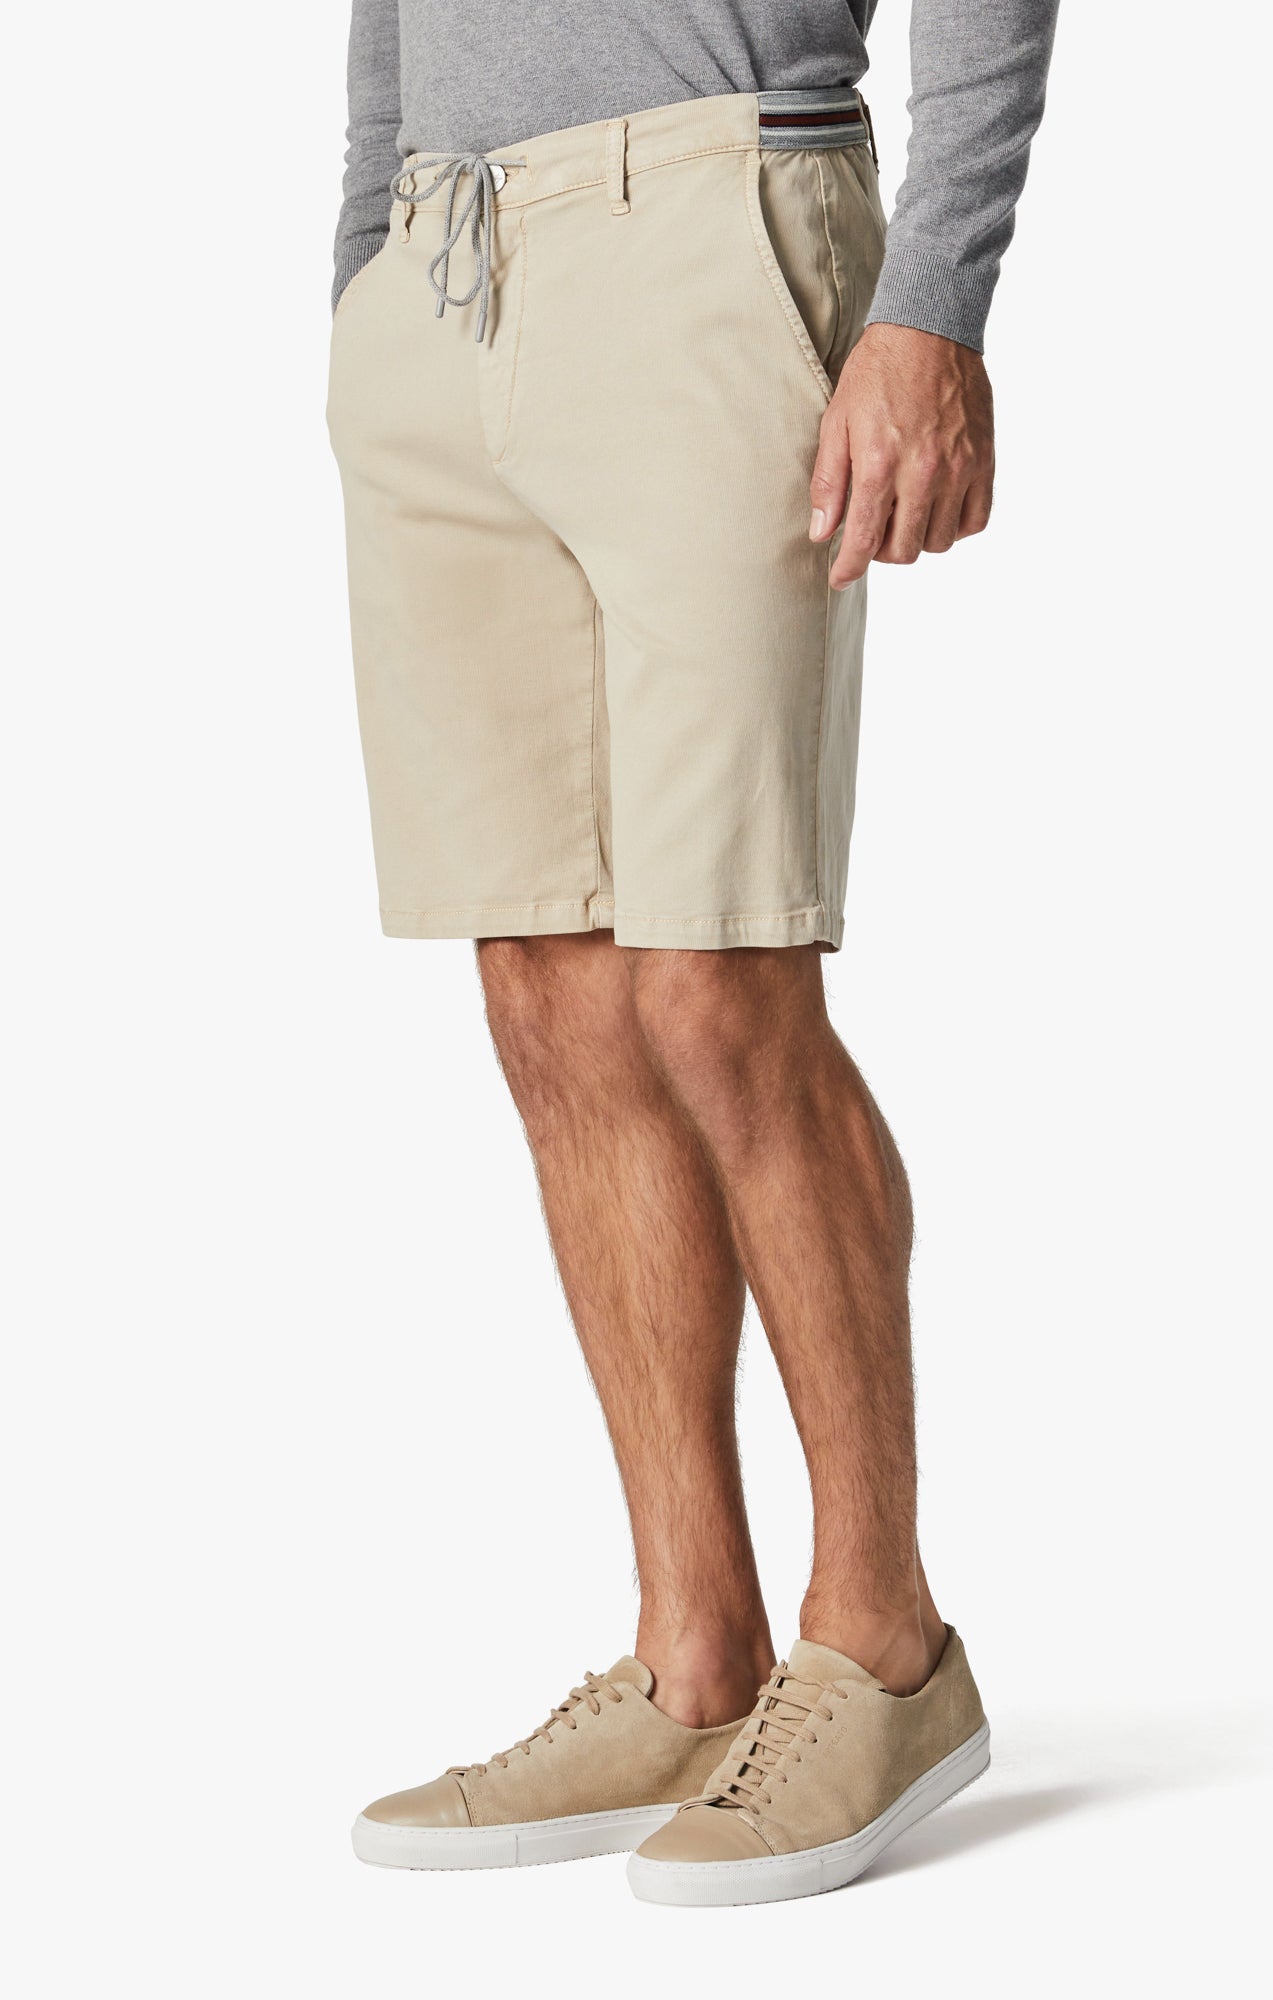 Ravenna Drawstring Shorts In Sand Soft Touch Image 3